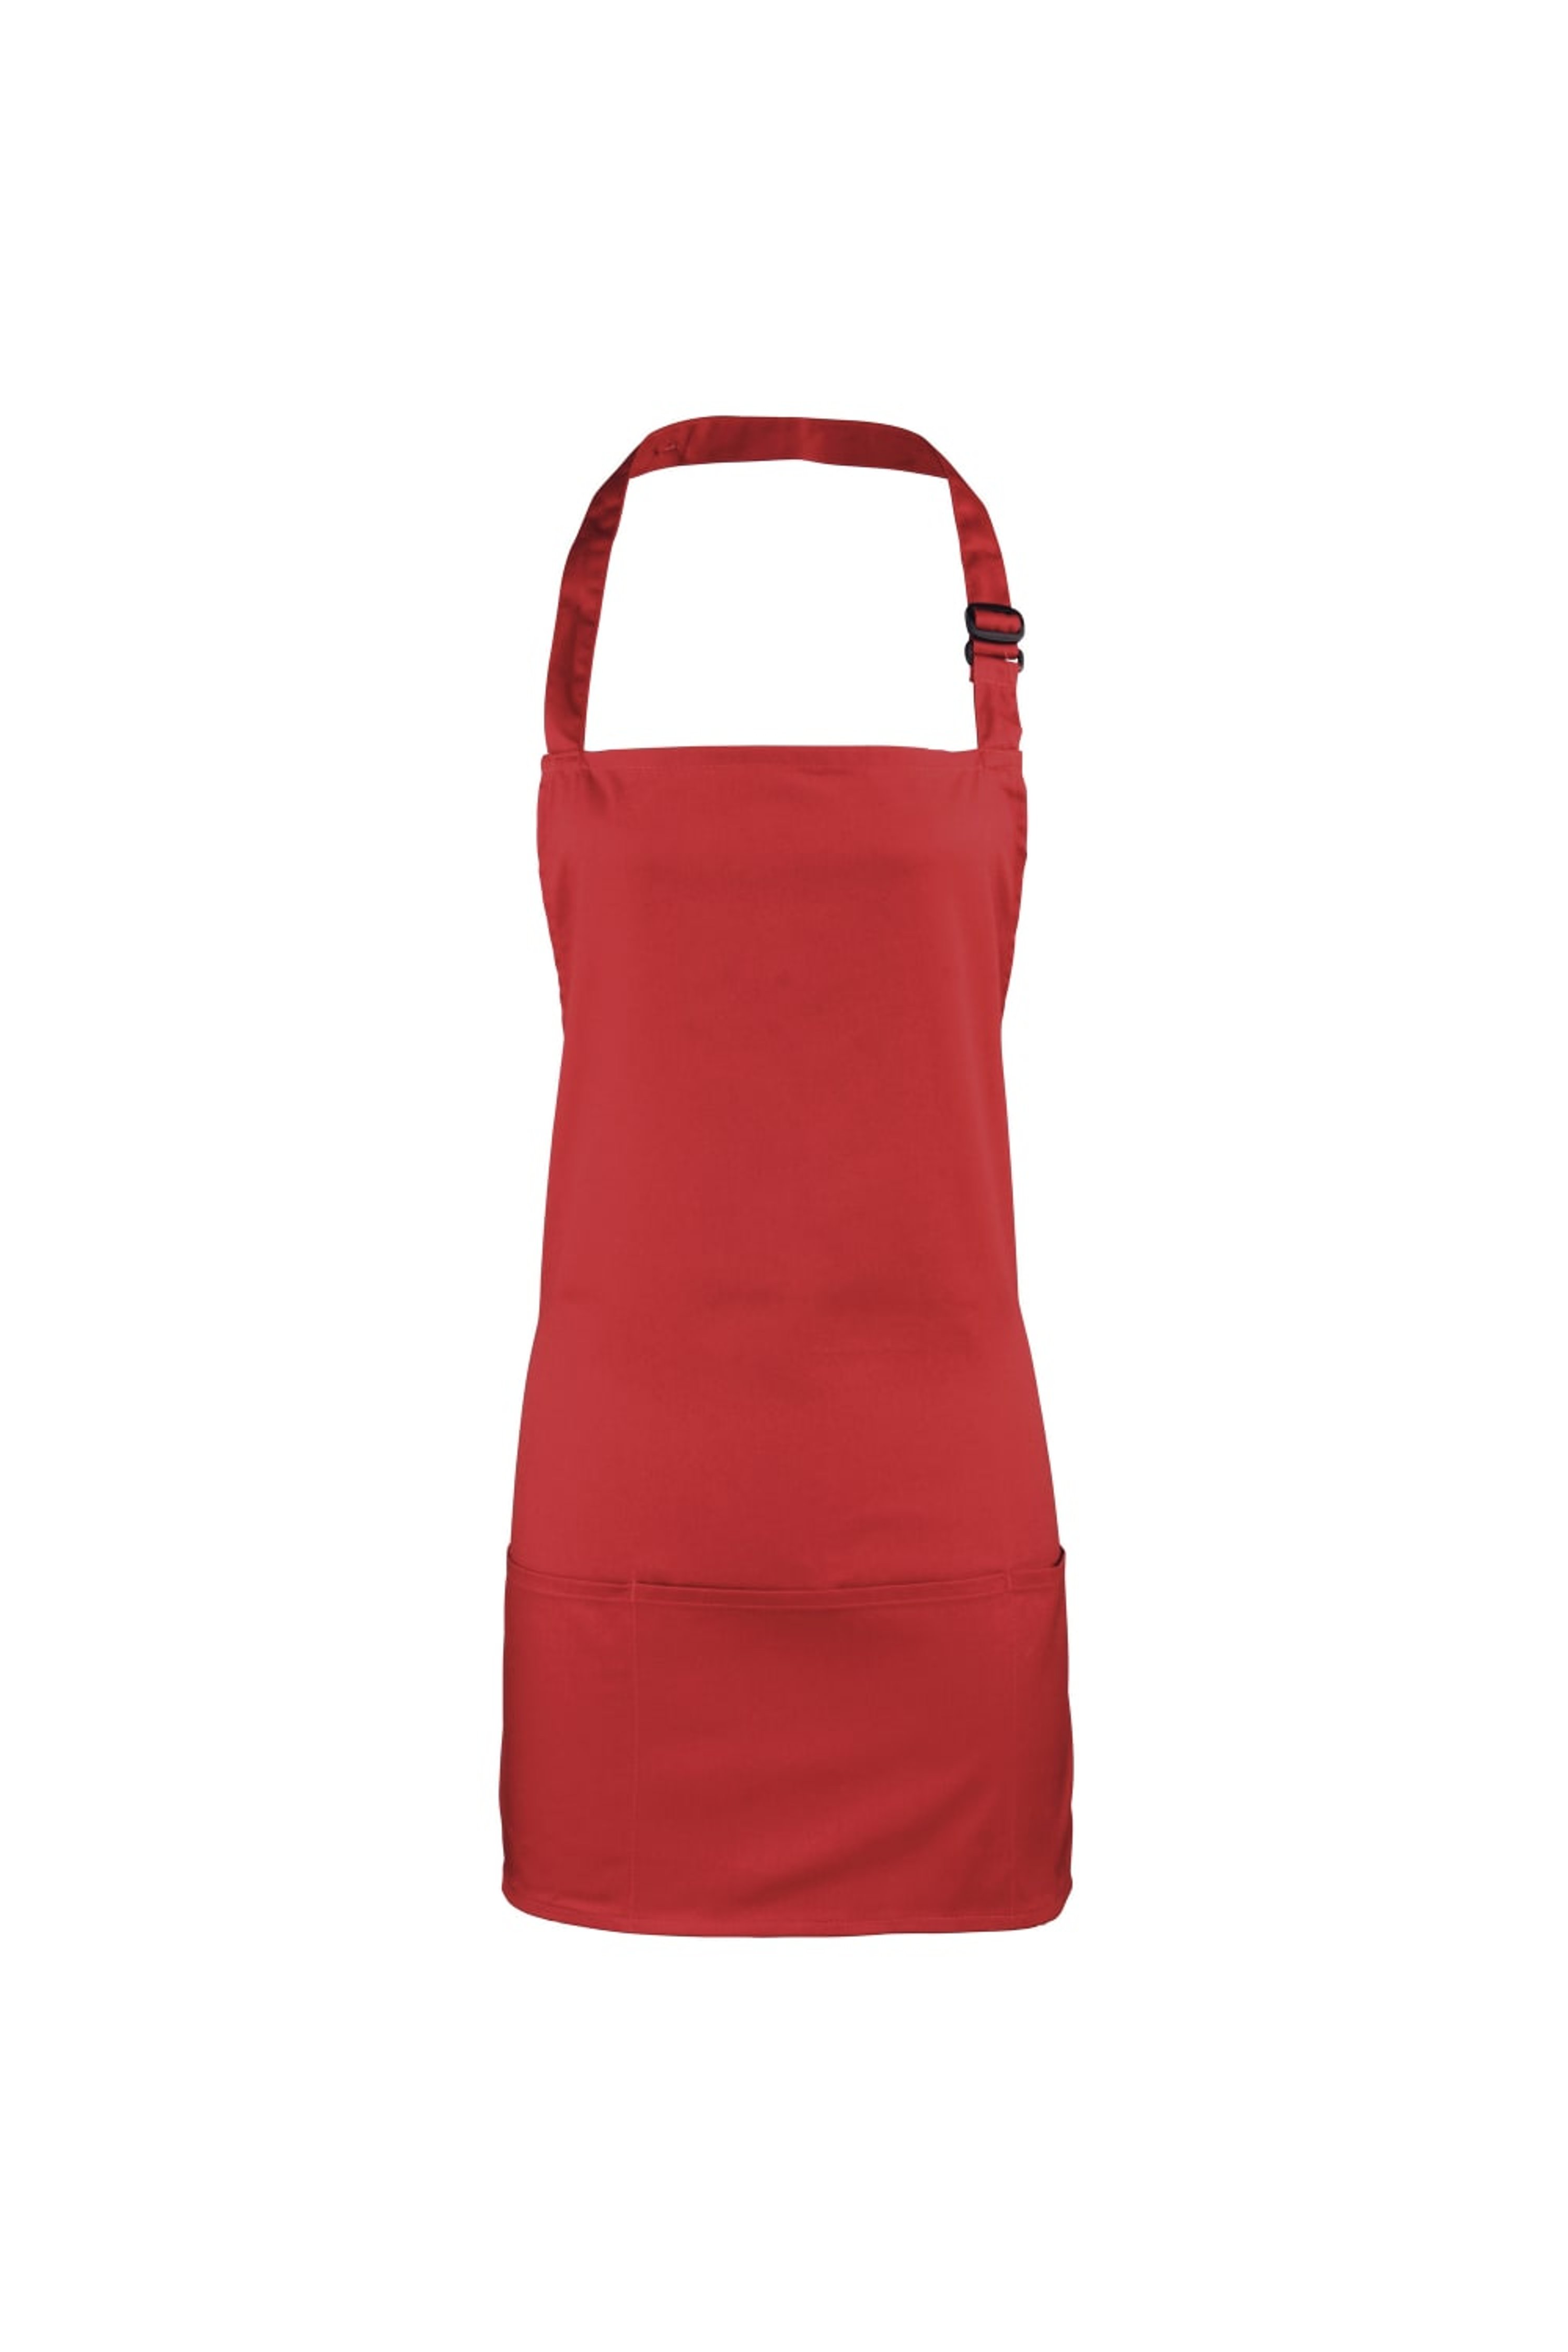 PREMIER PREMIER COLOURS 2-IN-1 APRON / WORKWEAR (PACK OF 2) (RED) (ONE SIZE)